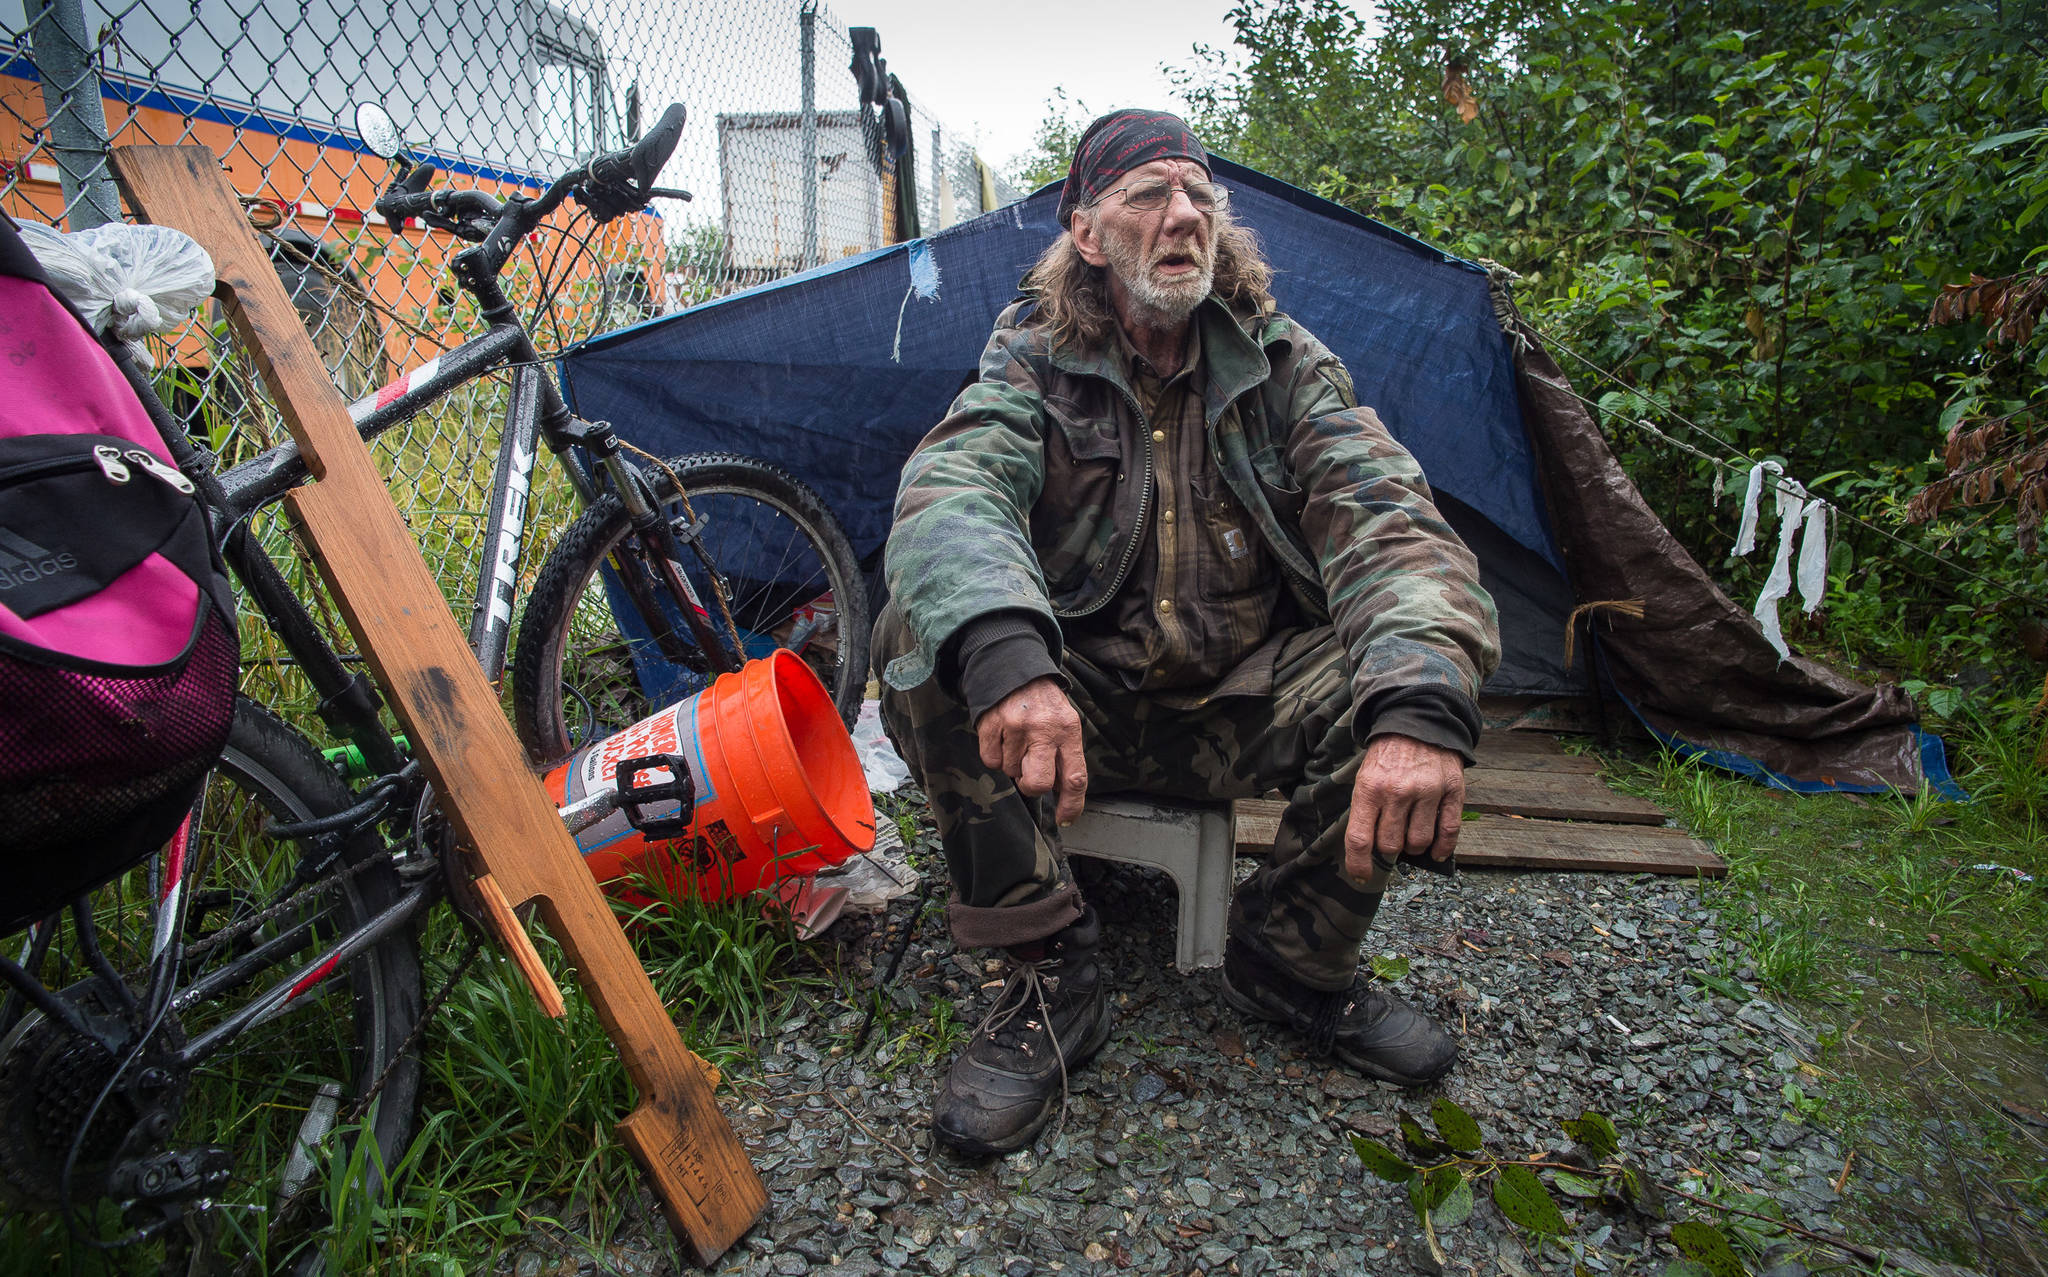 Eugene Graham, who calls himself the Traveler, talks about living in a homeless encampment on property belonging to the Alaska Mental Health Trust Authority on Friday, Aug. 18, 2017. The Trust Authority will give campers a two-week notice to vacate the area starting Tuesday. (Michael Penn | Juneau Empire)